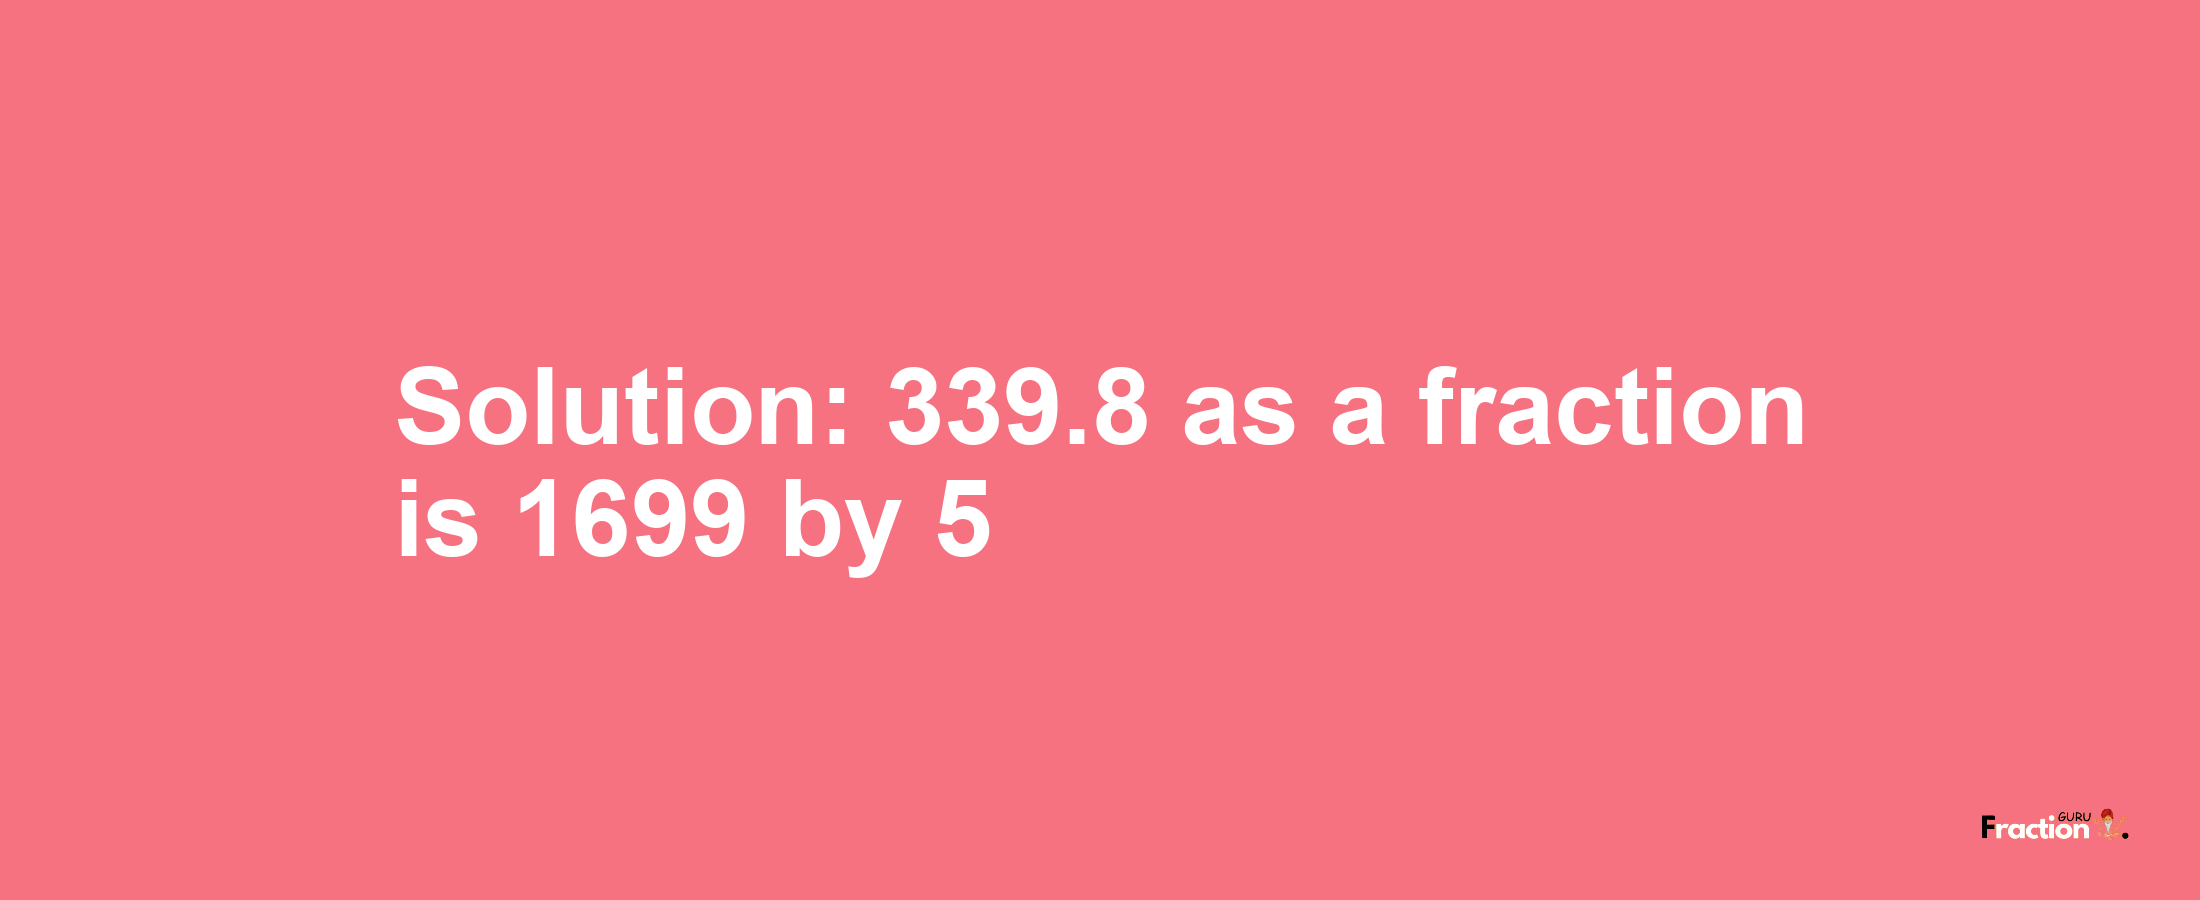 Solution:339.8 as a fraction is 1699/5